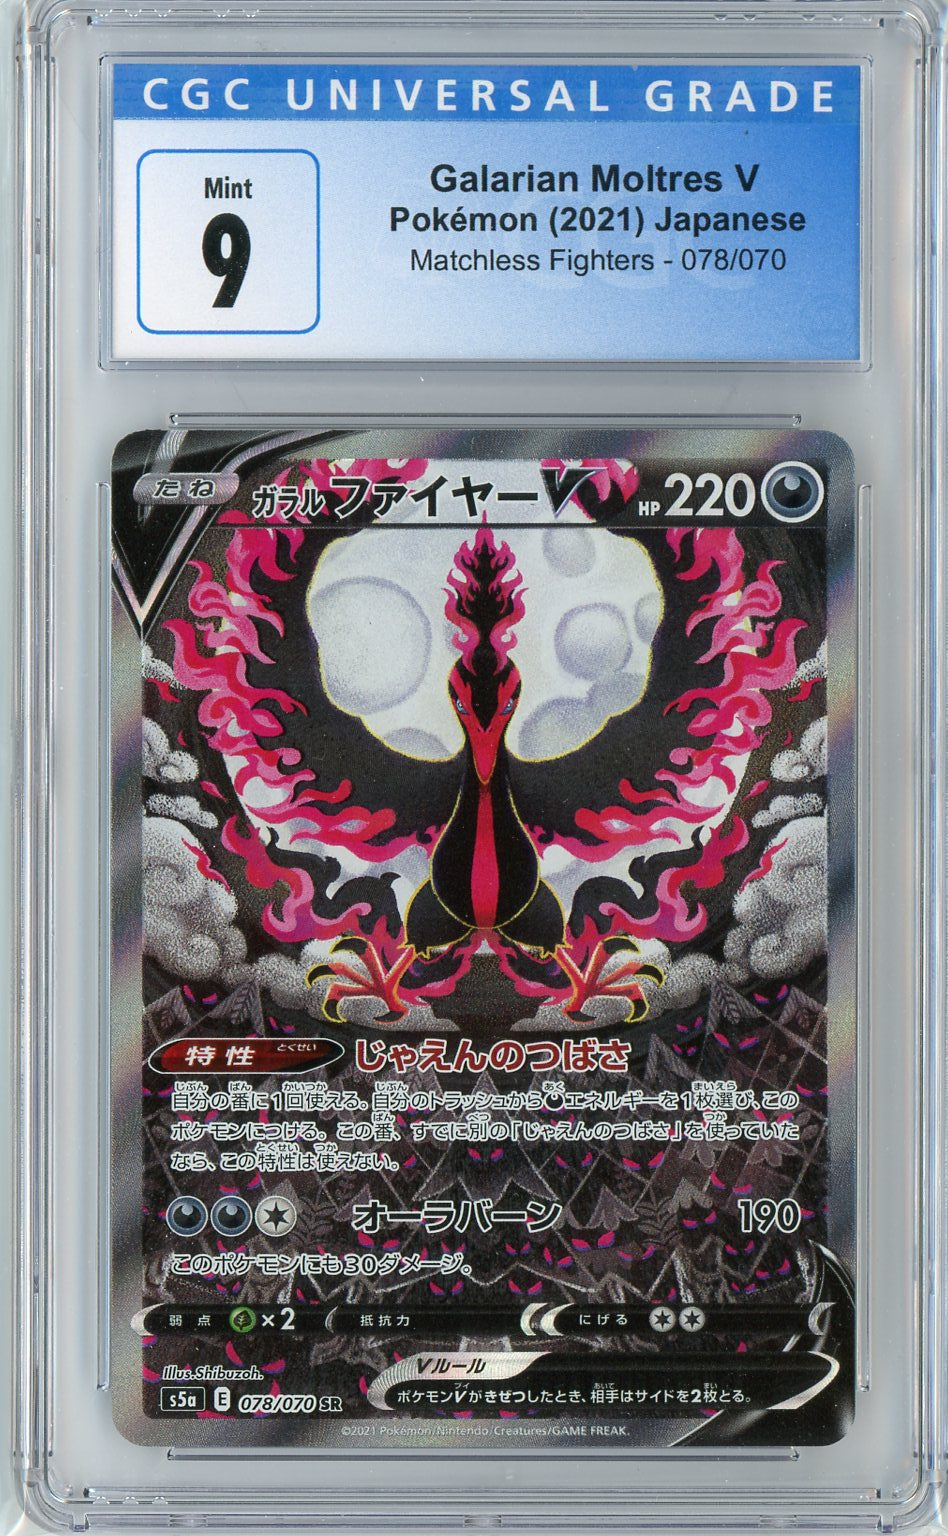 CGC 9 Mint Japanese Galarian Moltres V 078/070 - Alternate Art - Matchless Fighters 2021